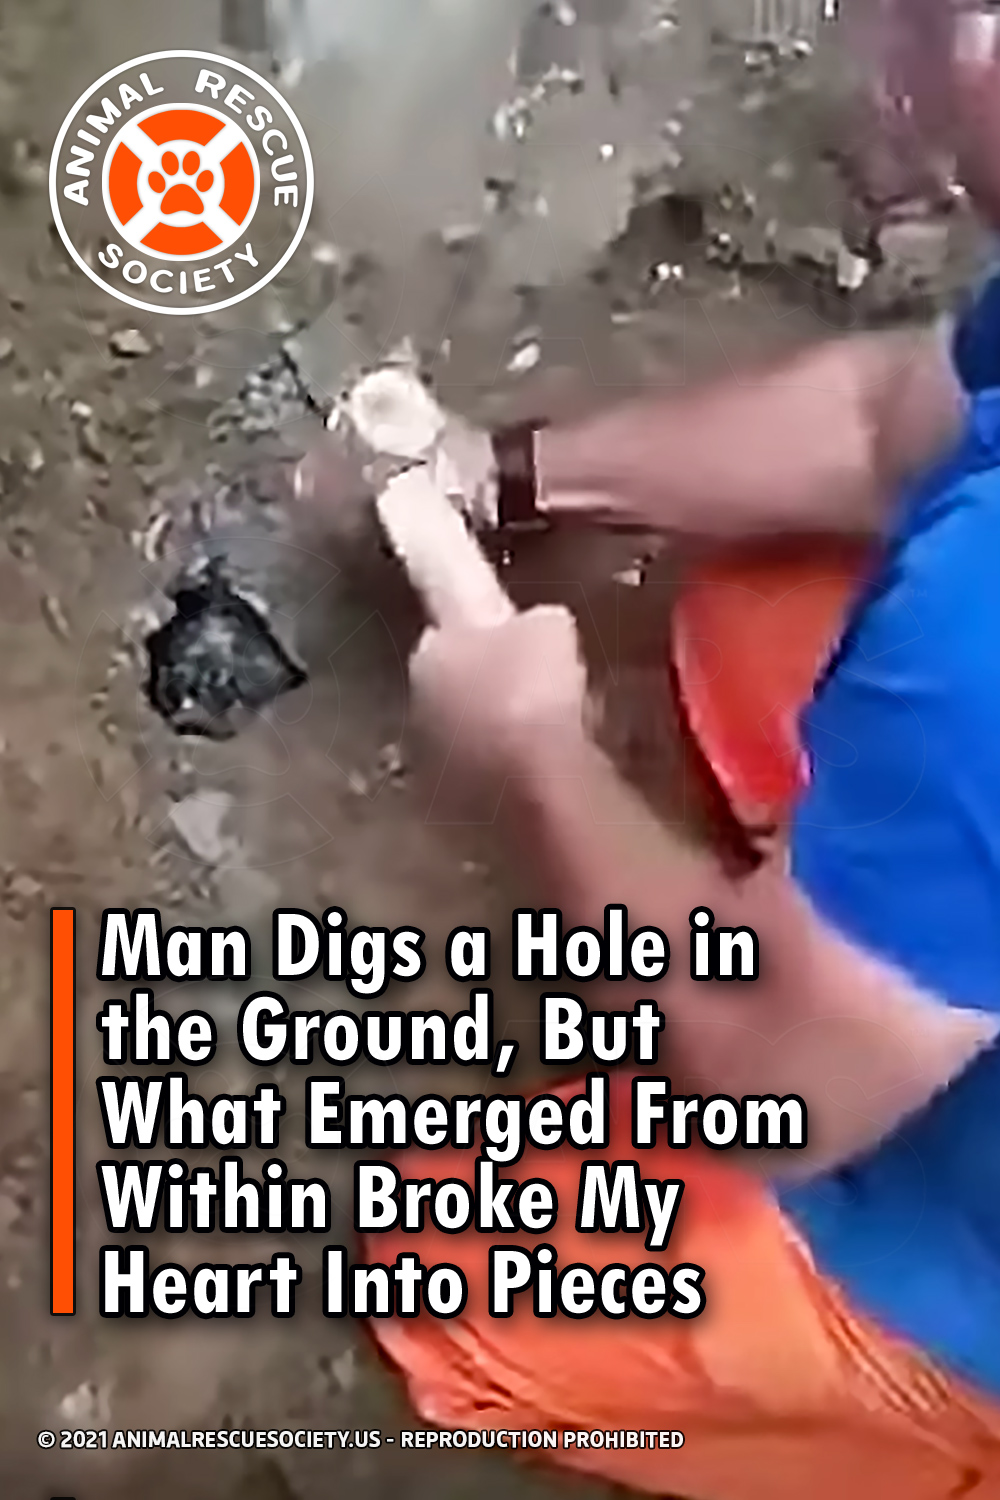 Man Digs a Hole in the Ground, But What Emerged From Within Broke My Heart Into Pieces